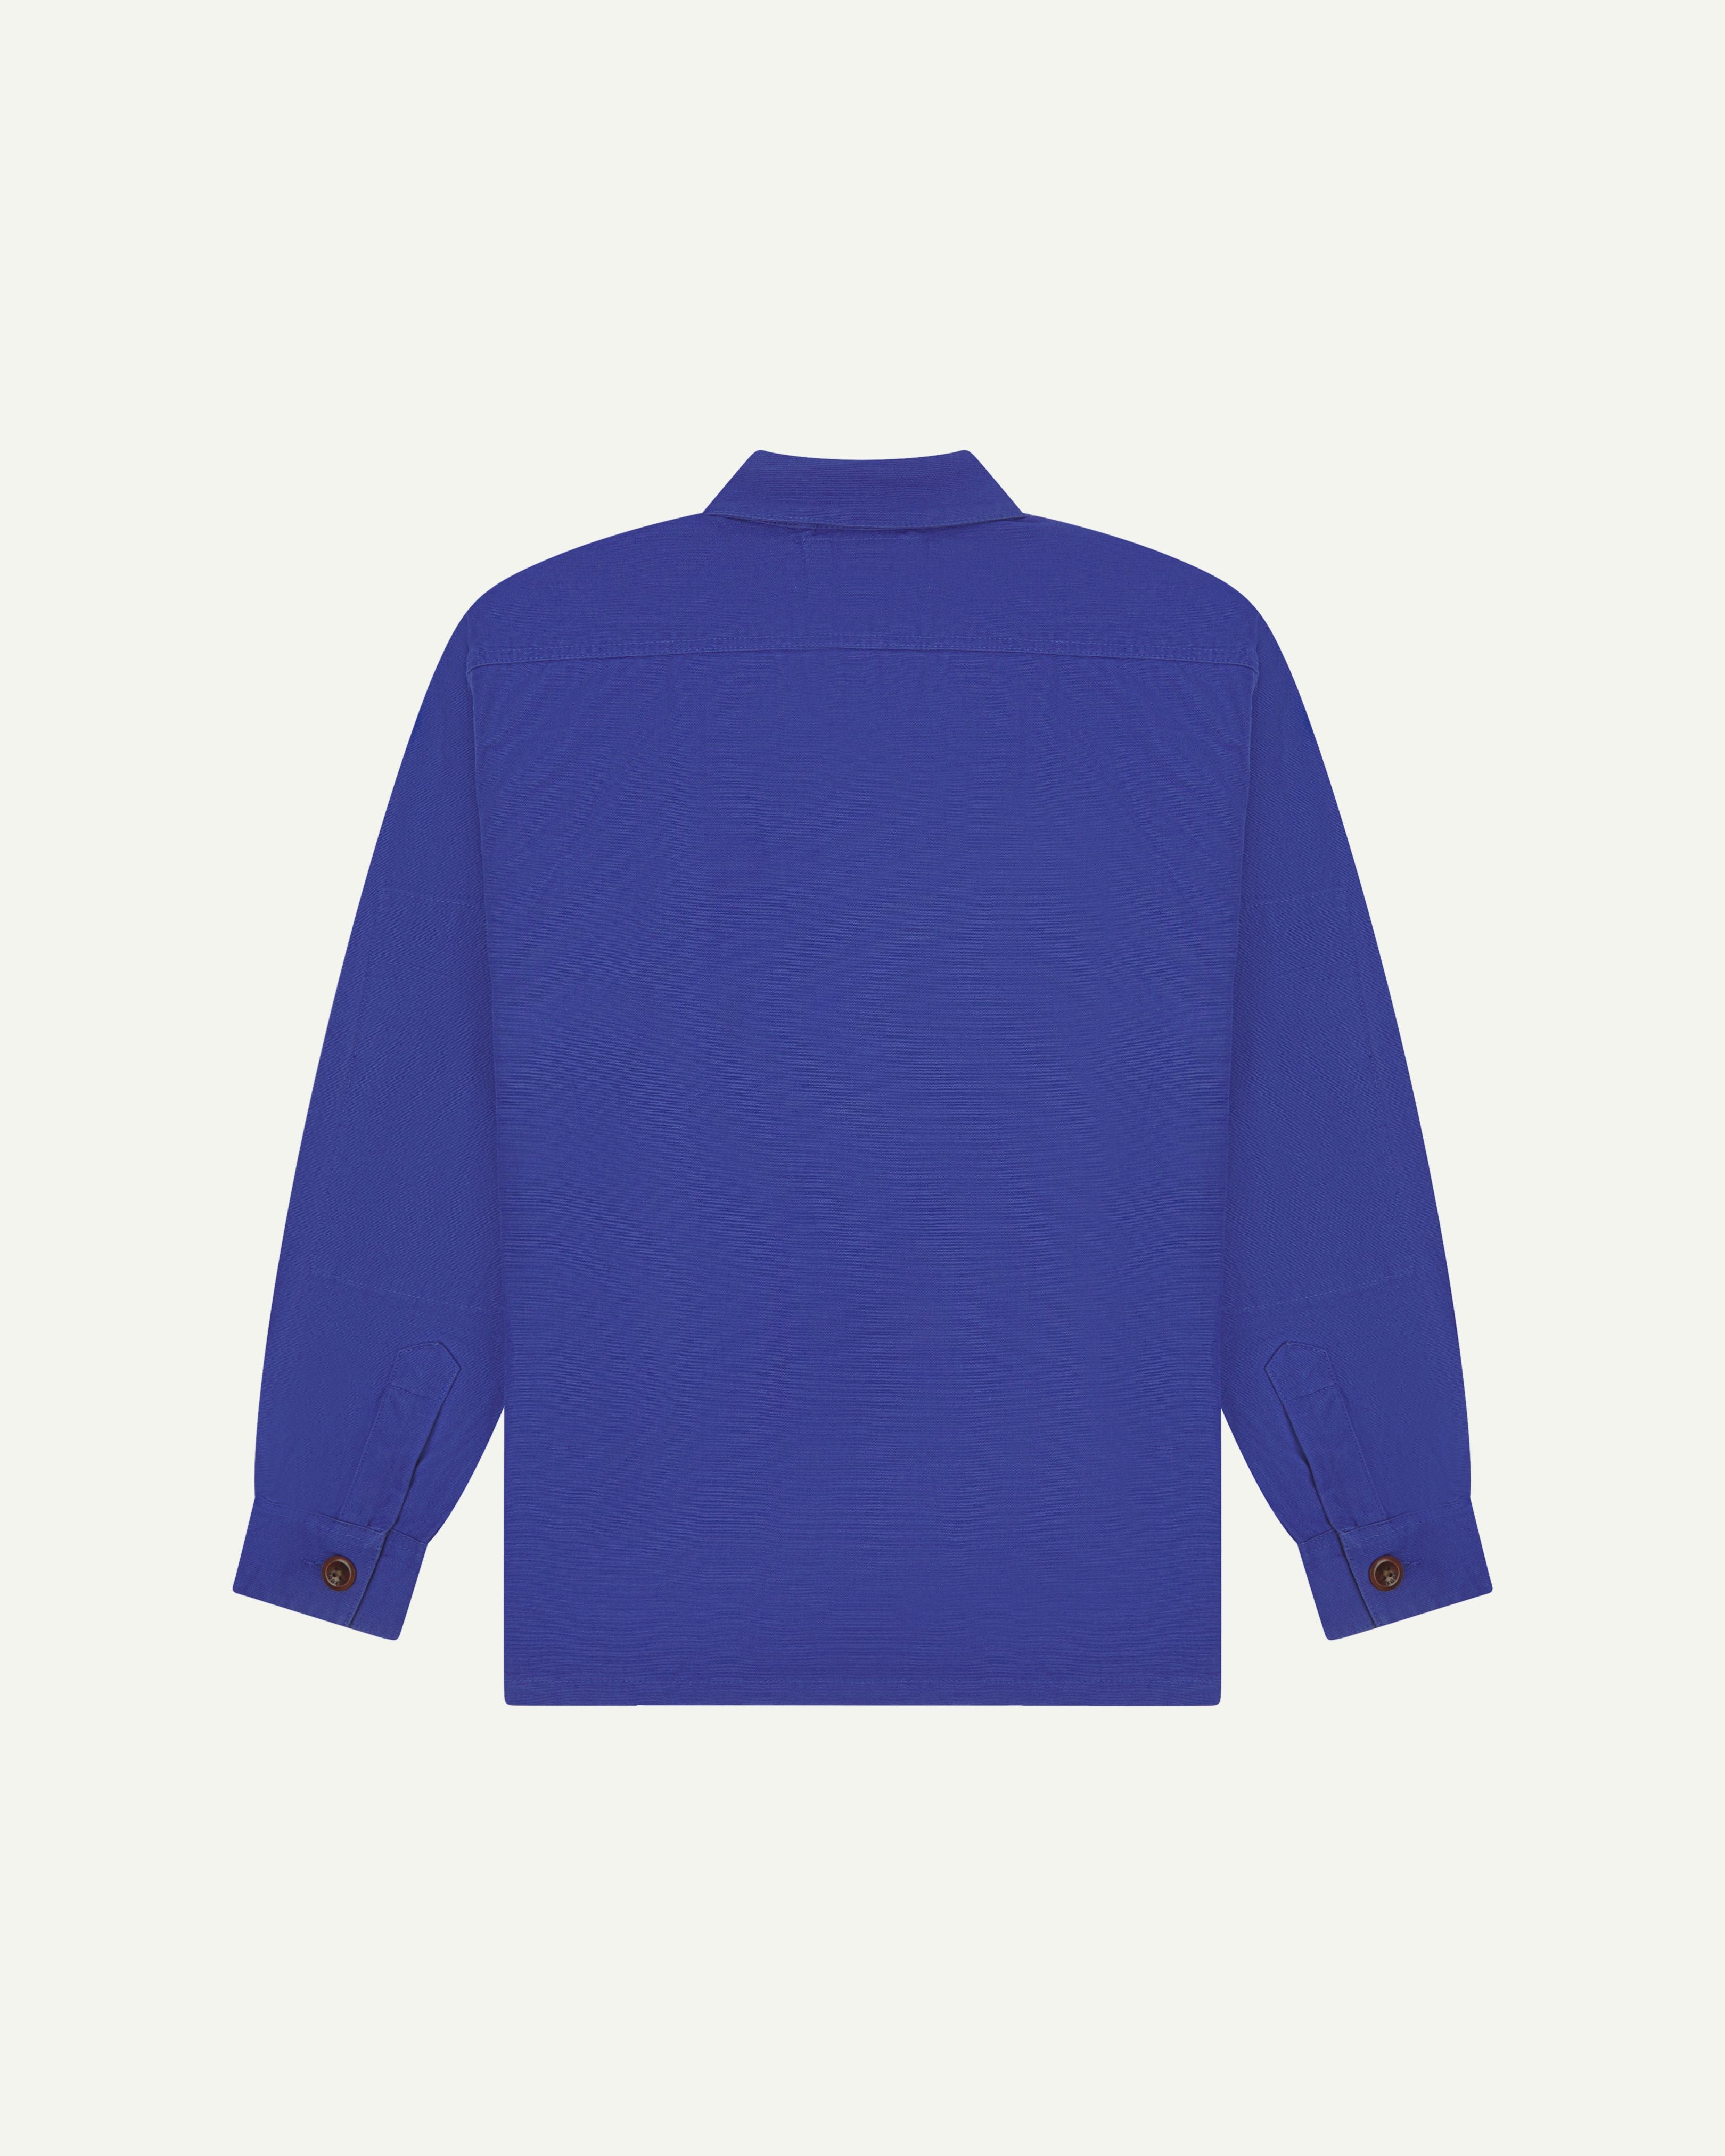 Back flat view of ultra blue buttoned 3003 workshirt for men from Uskees.